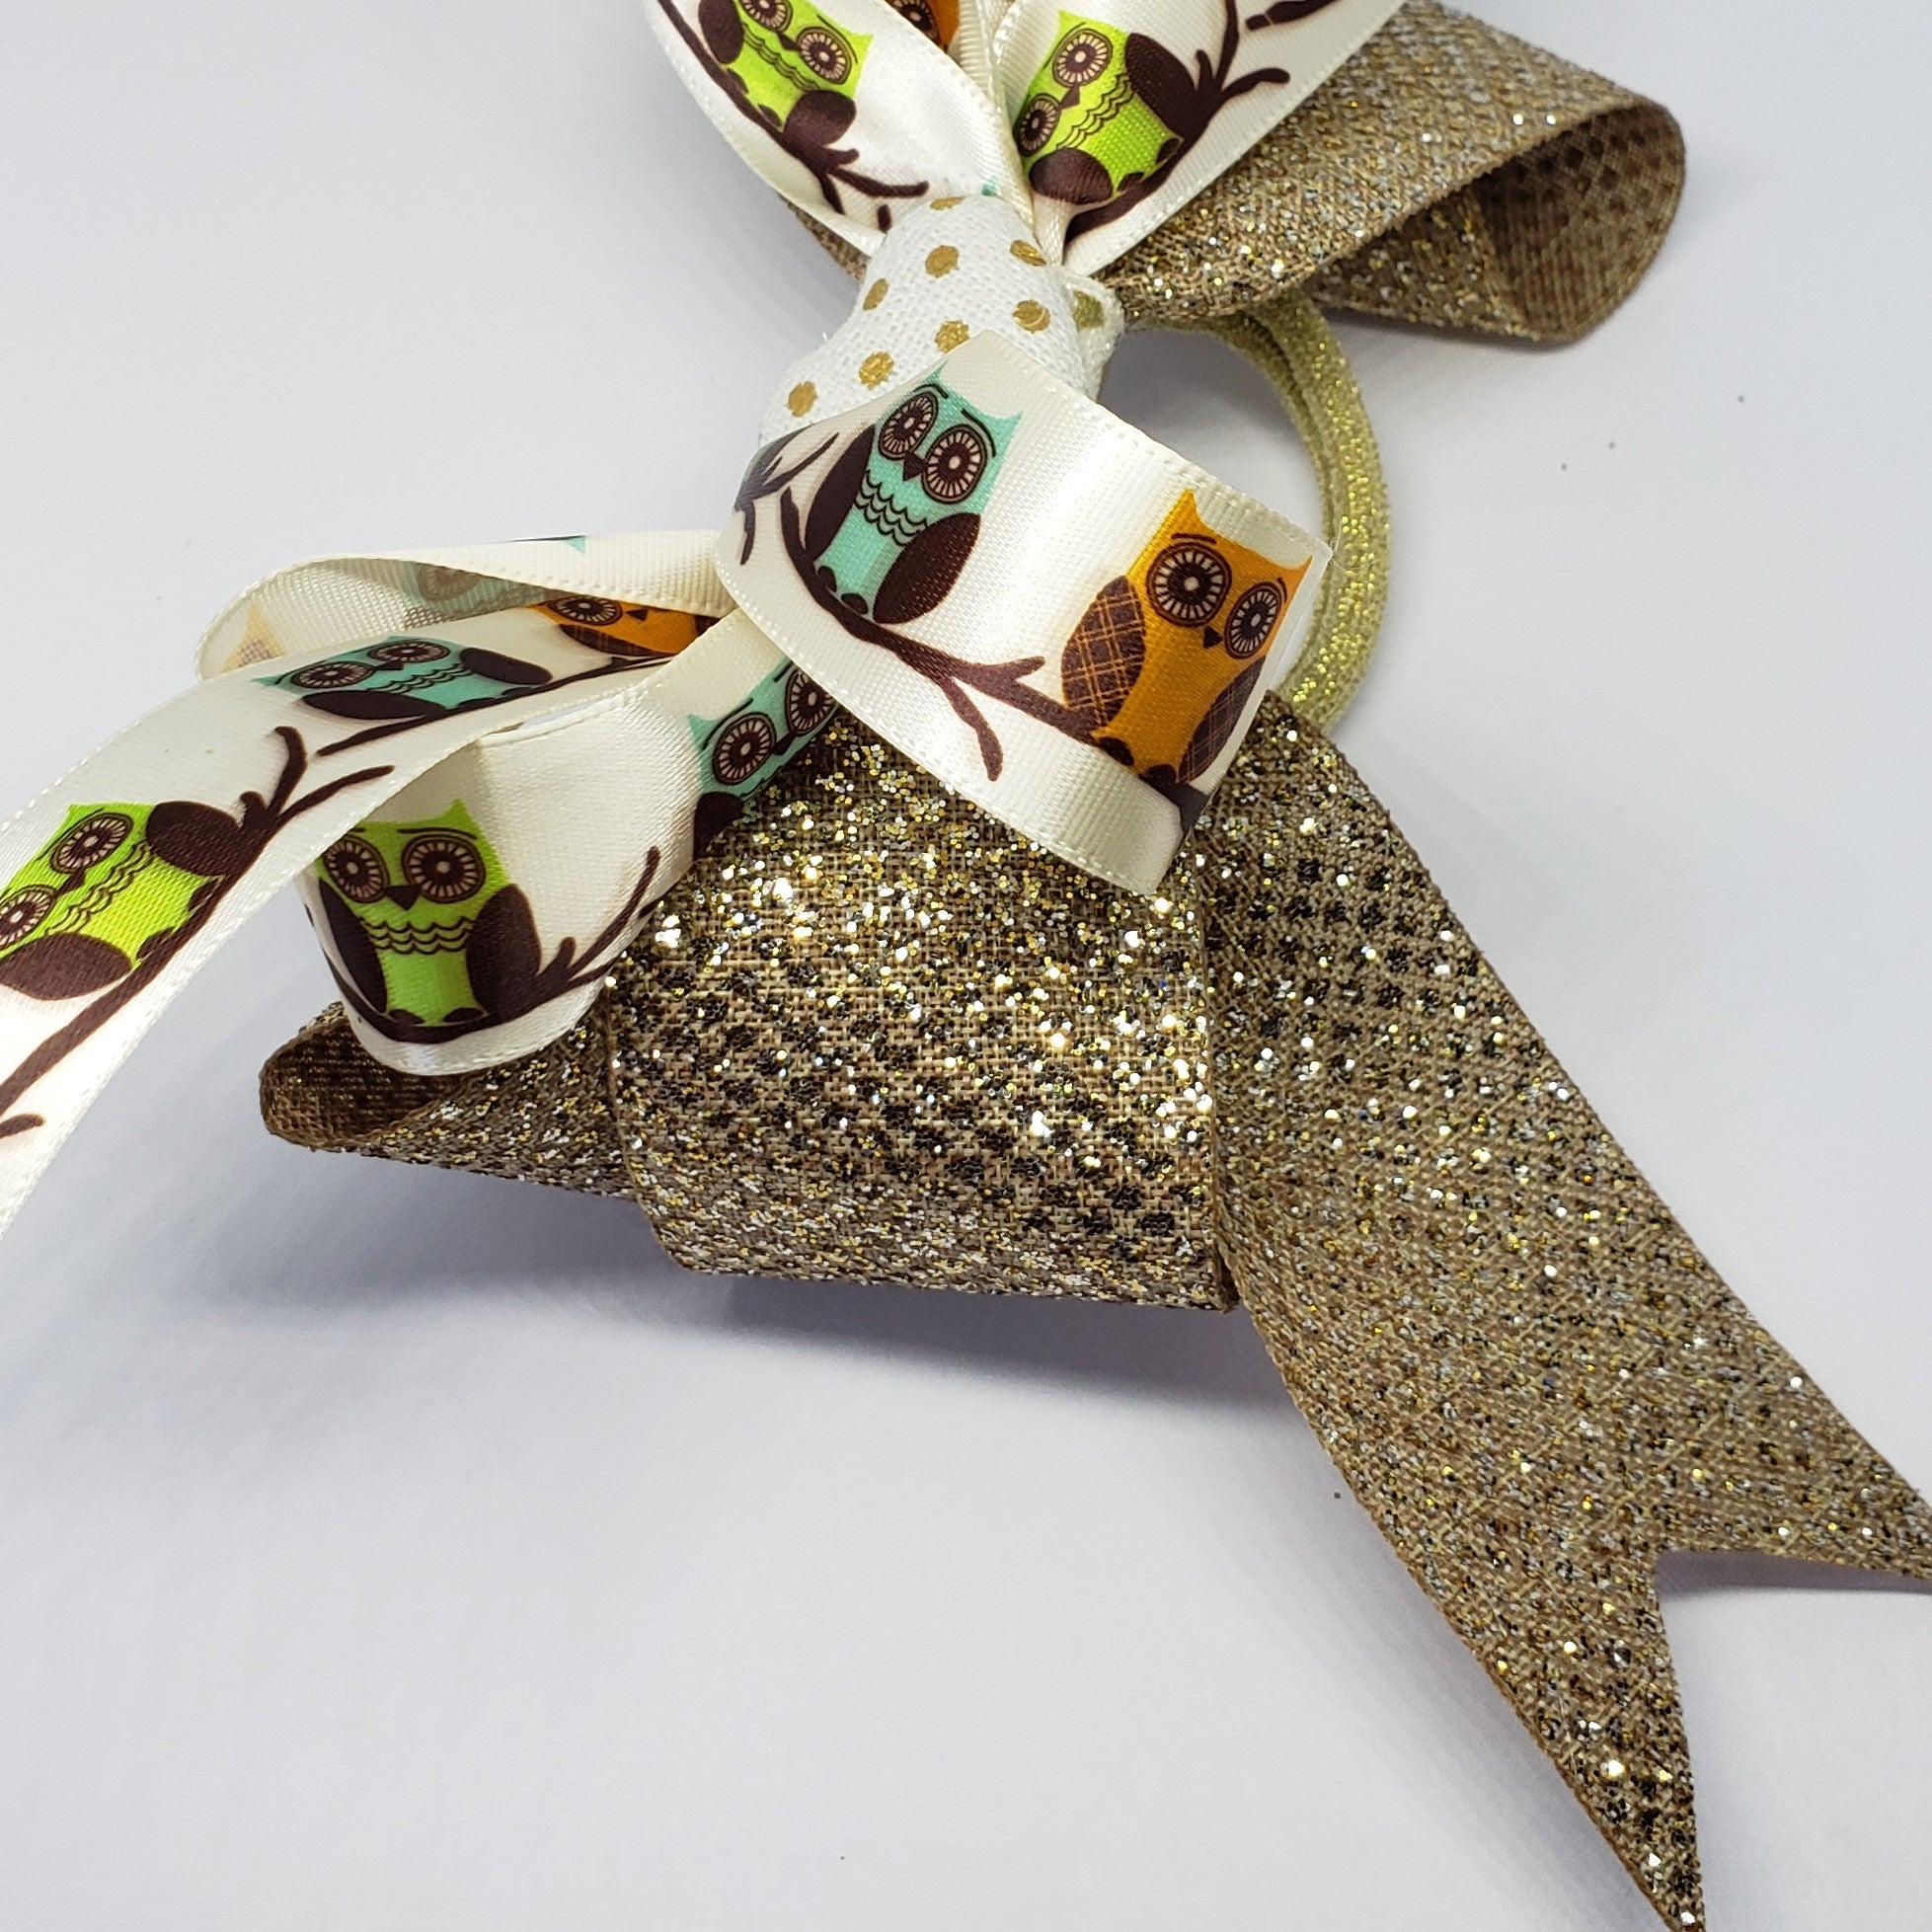 Kelsea Heart of Gold Hair Bow in Cream, Taupe & Gold - Houzz of DVA Boutique